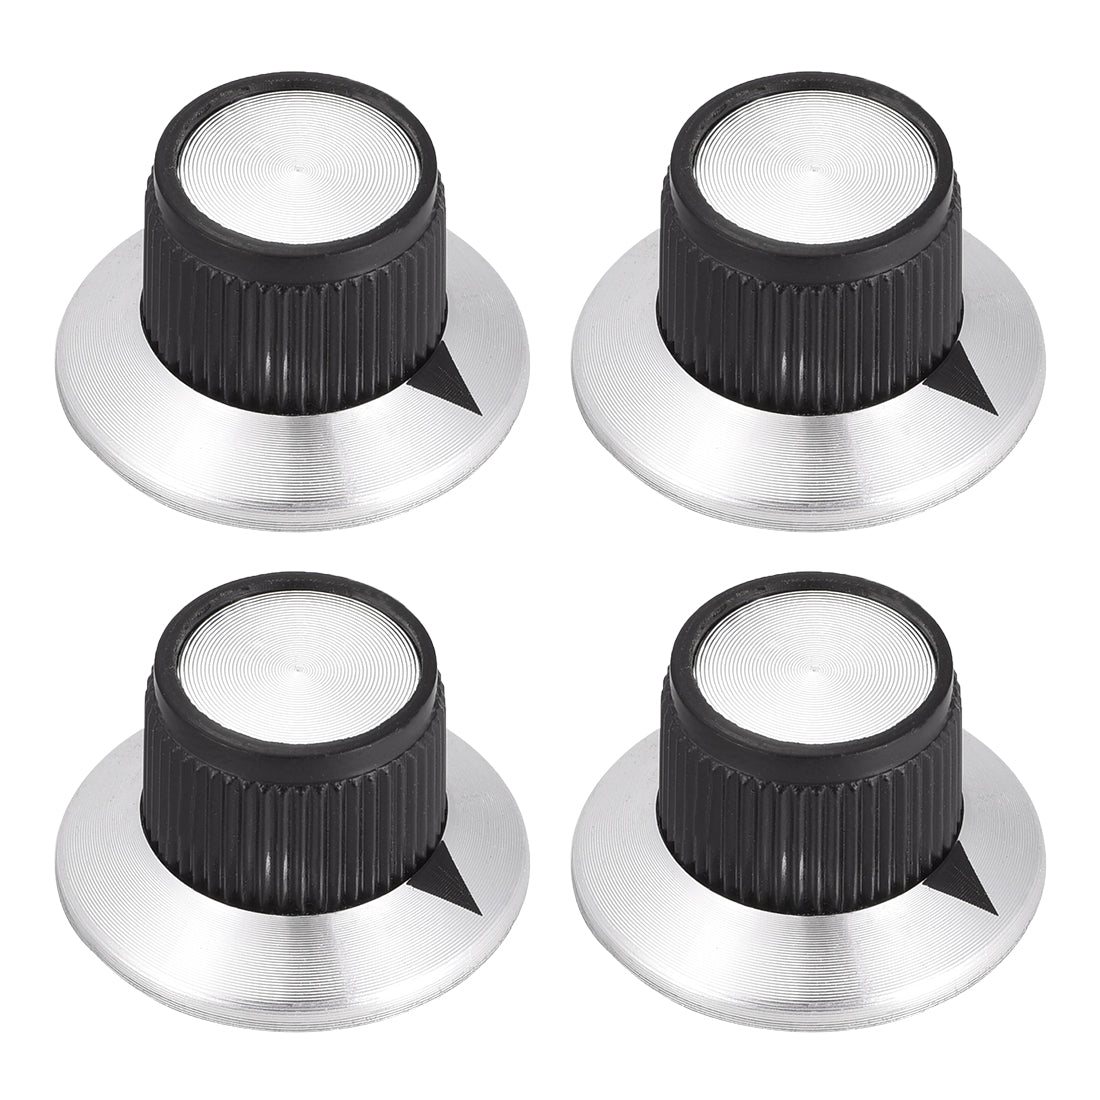 uxcell Uxcell 4pcs 6mm Potentiometer Control Knobs For Electric Guitar Acrylic Volume Tone Knobs Black Silver Tone